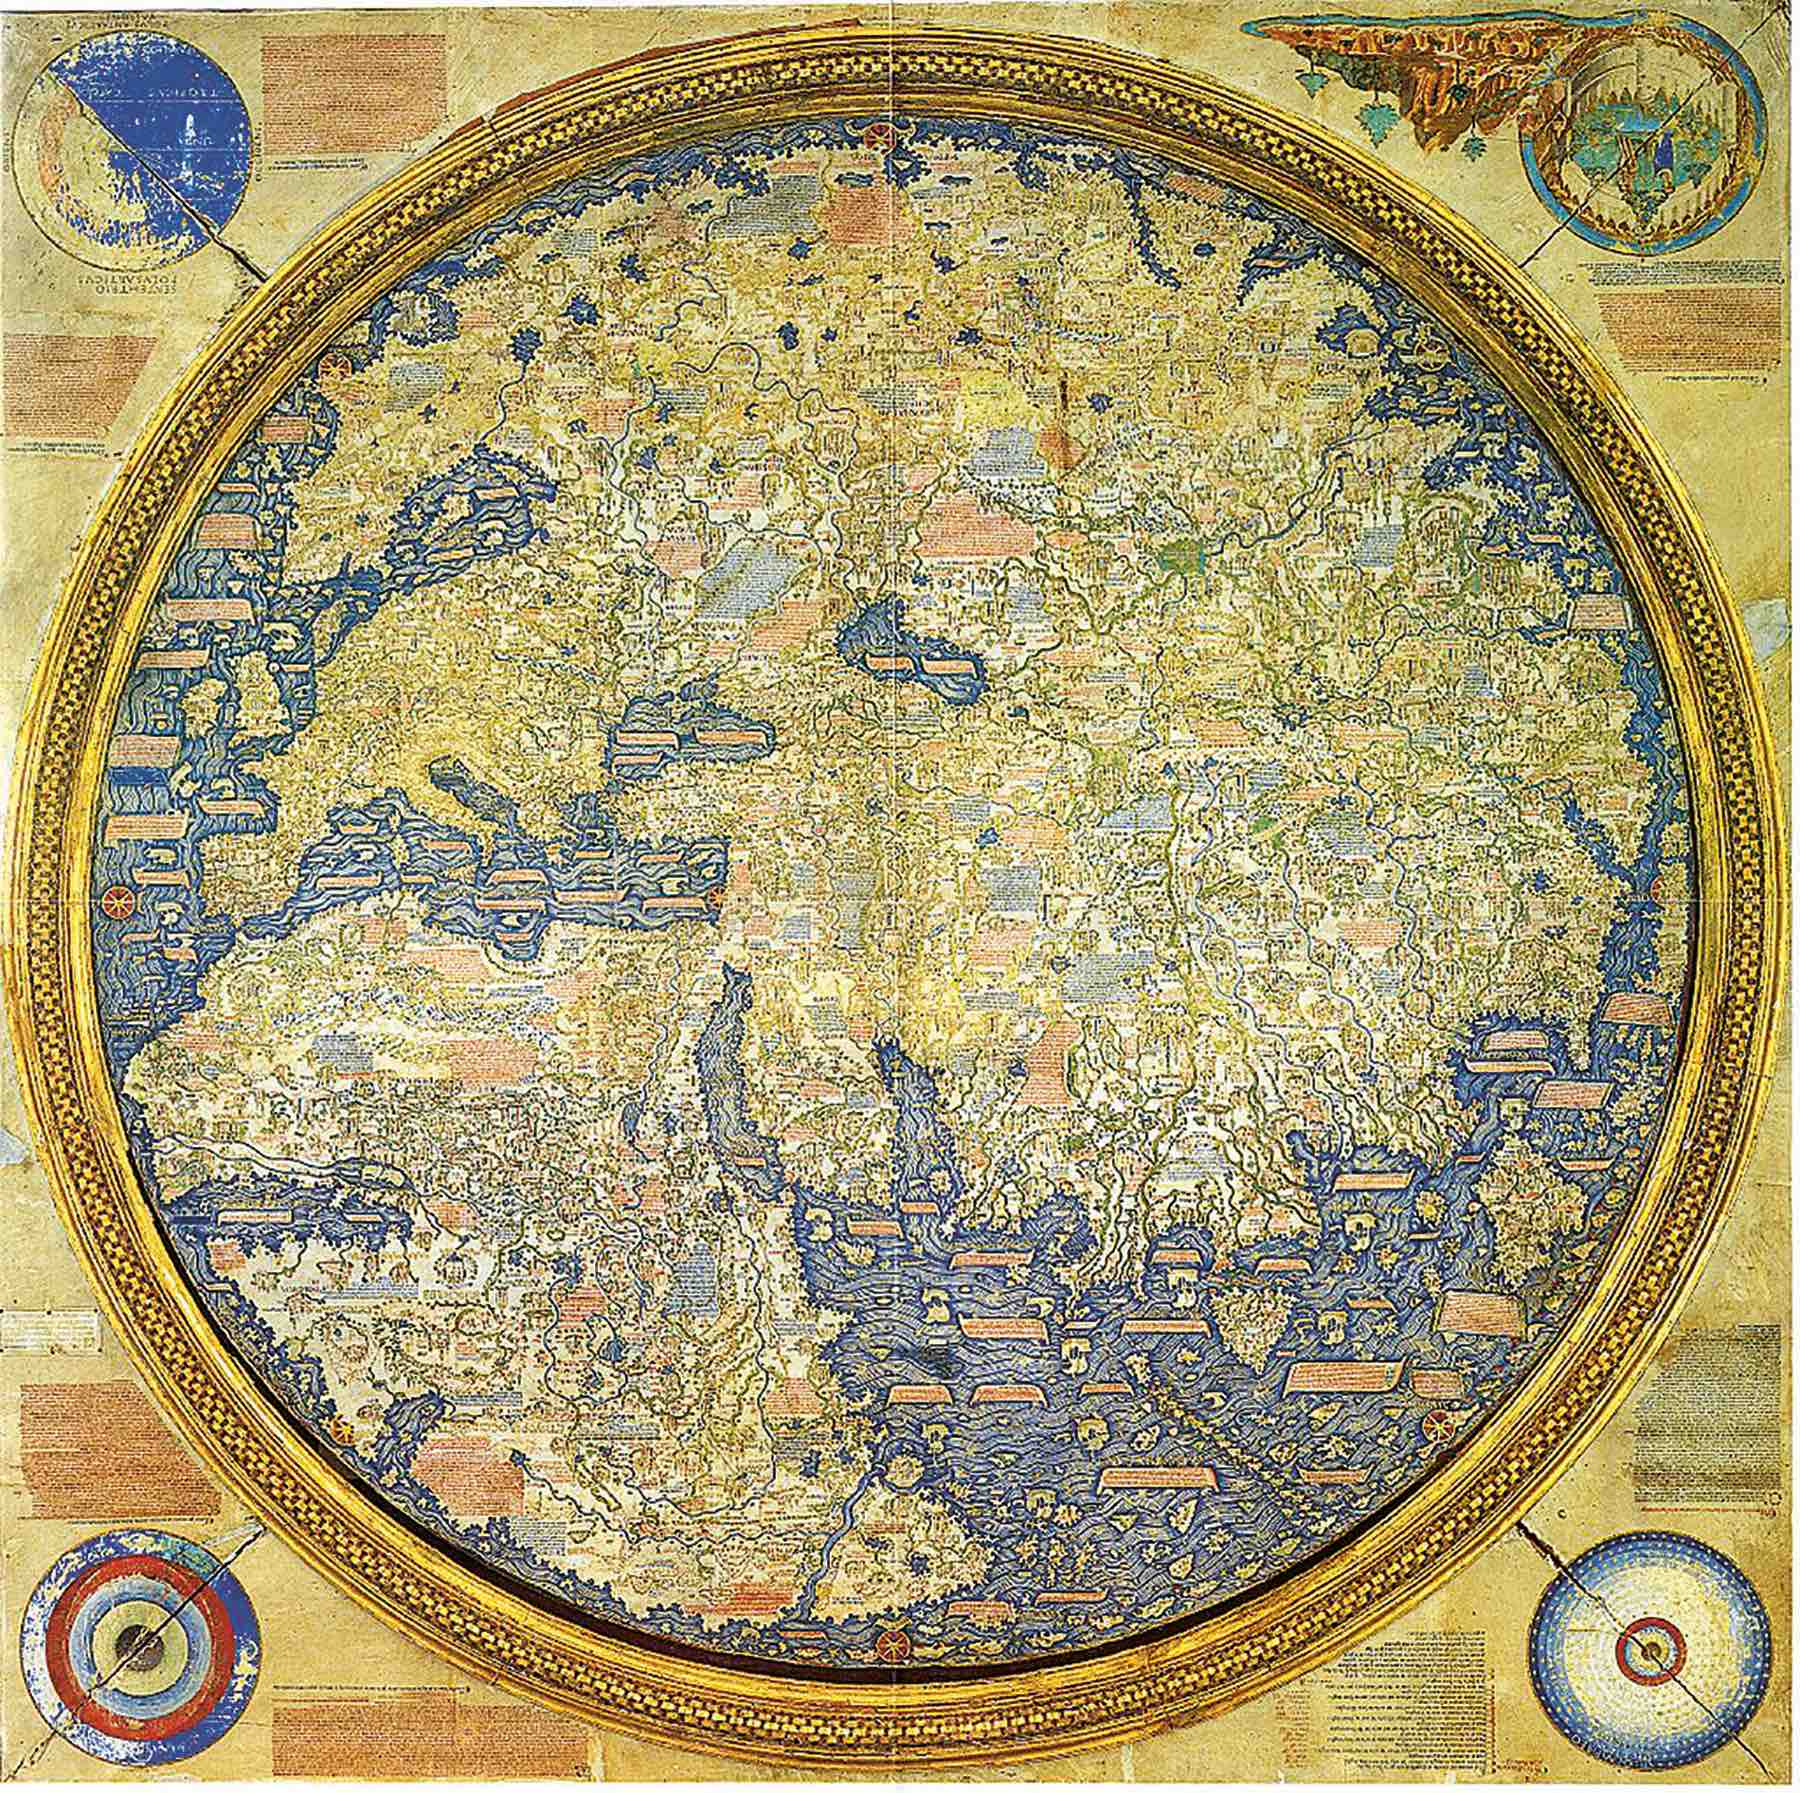 Fra Mauro World Map, c. 1450, facsimile by William Frazer, London and Venice, 1804. British Library, London.